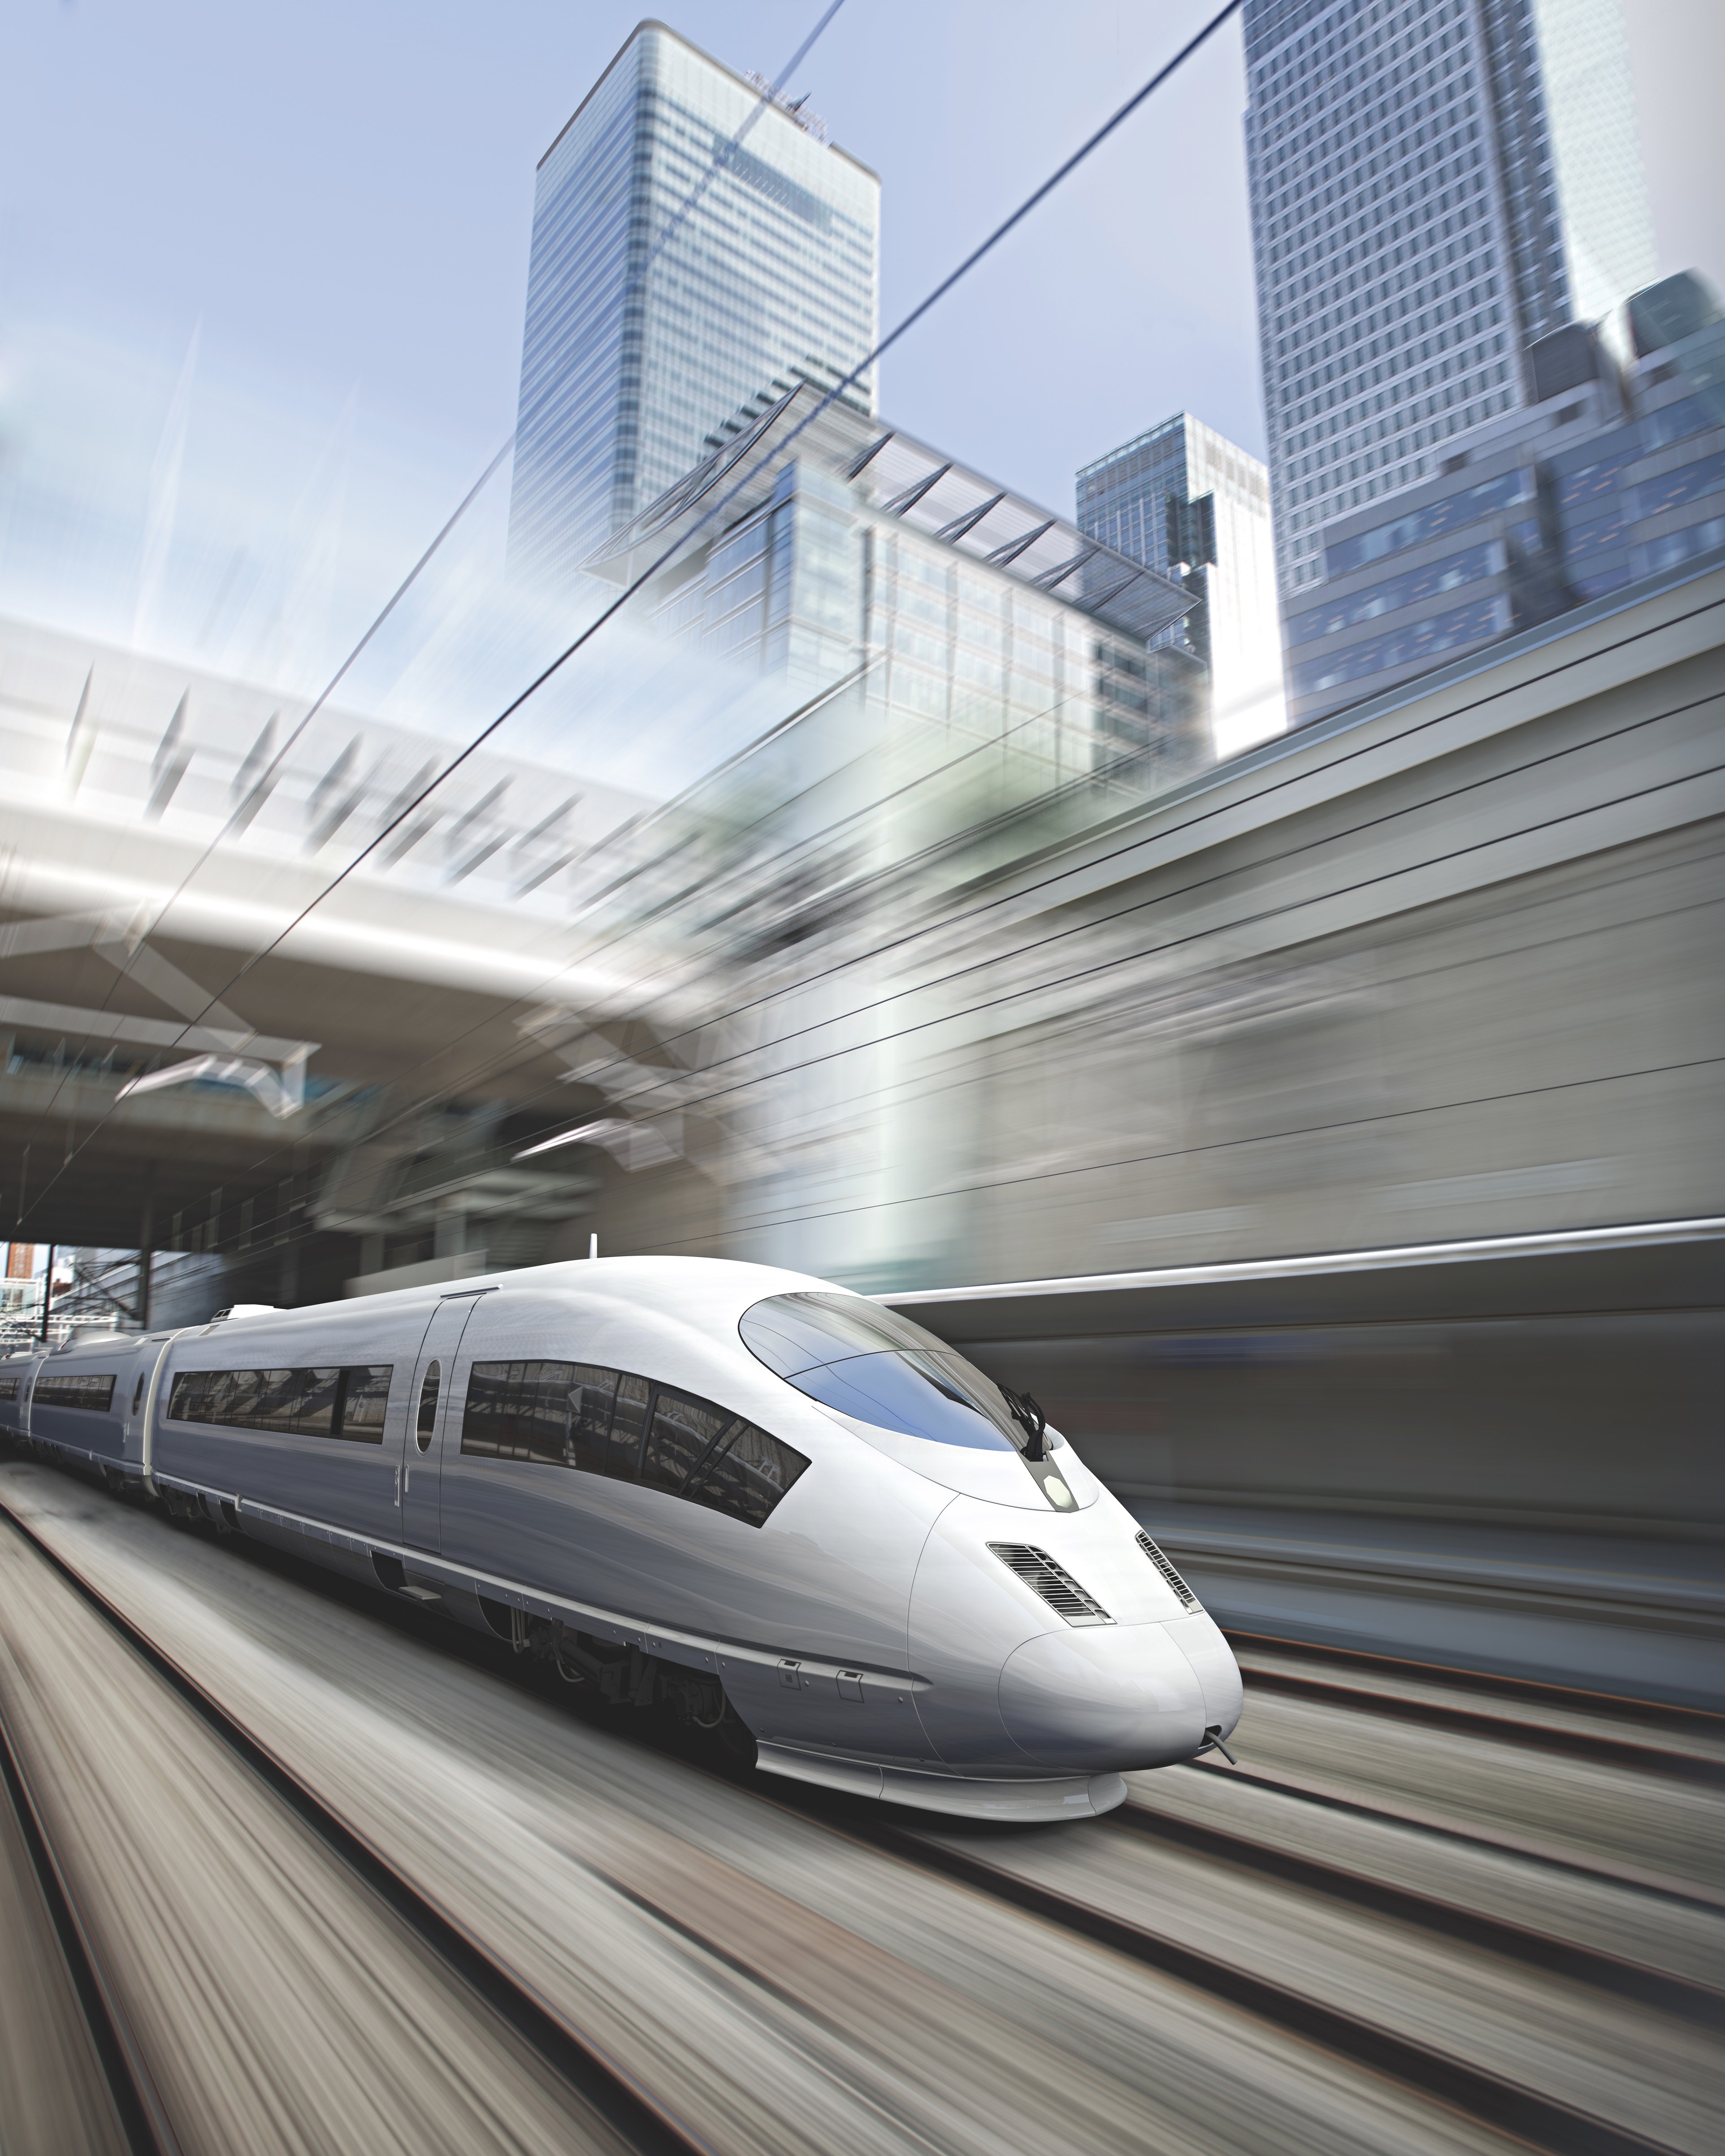 Araldite FST 40004/40005 reportedly allows faster development of high performance, lightweight composite components for rail interiors.